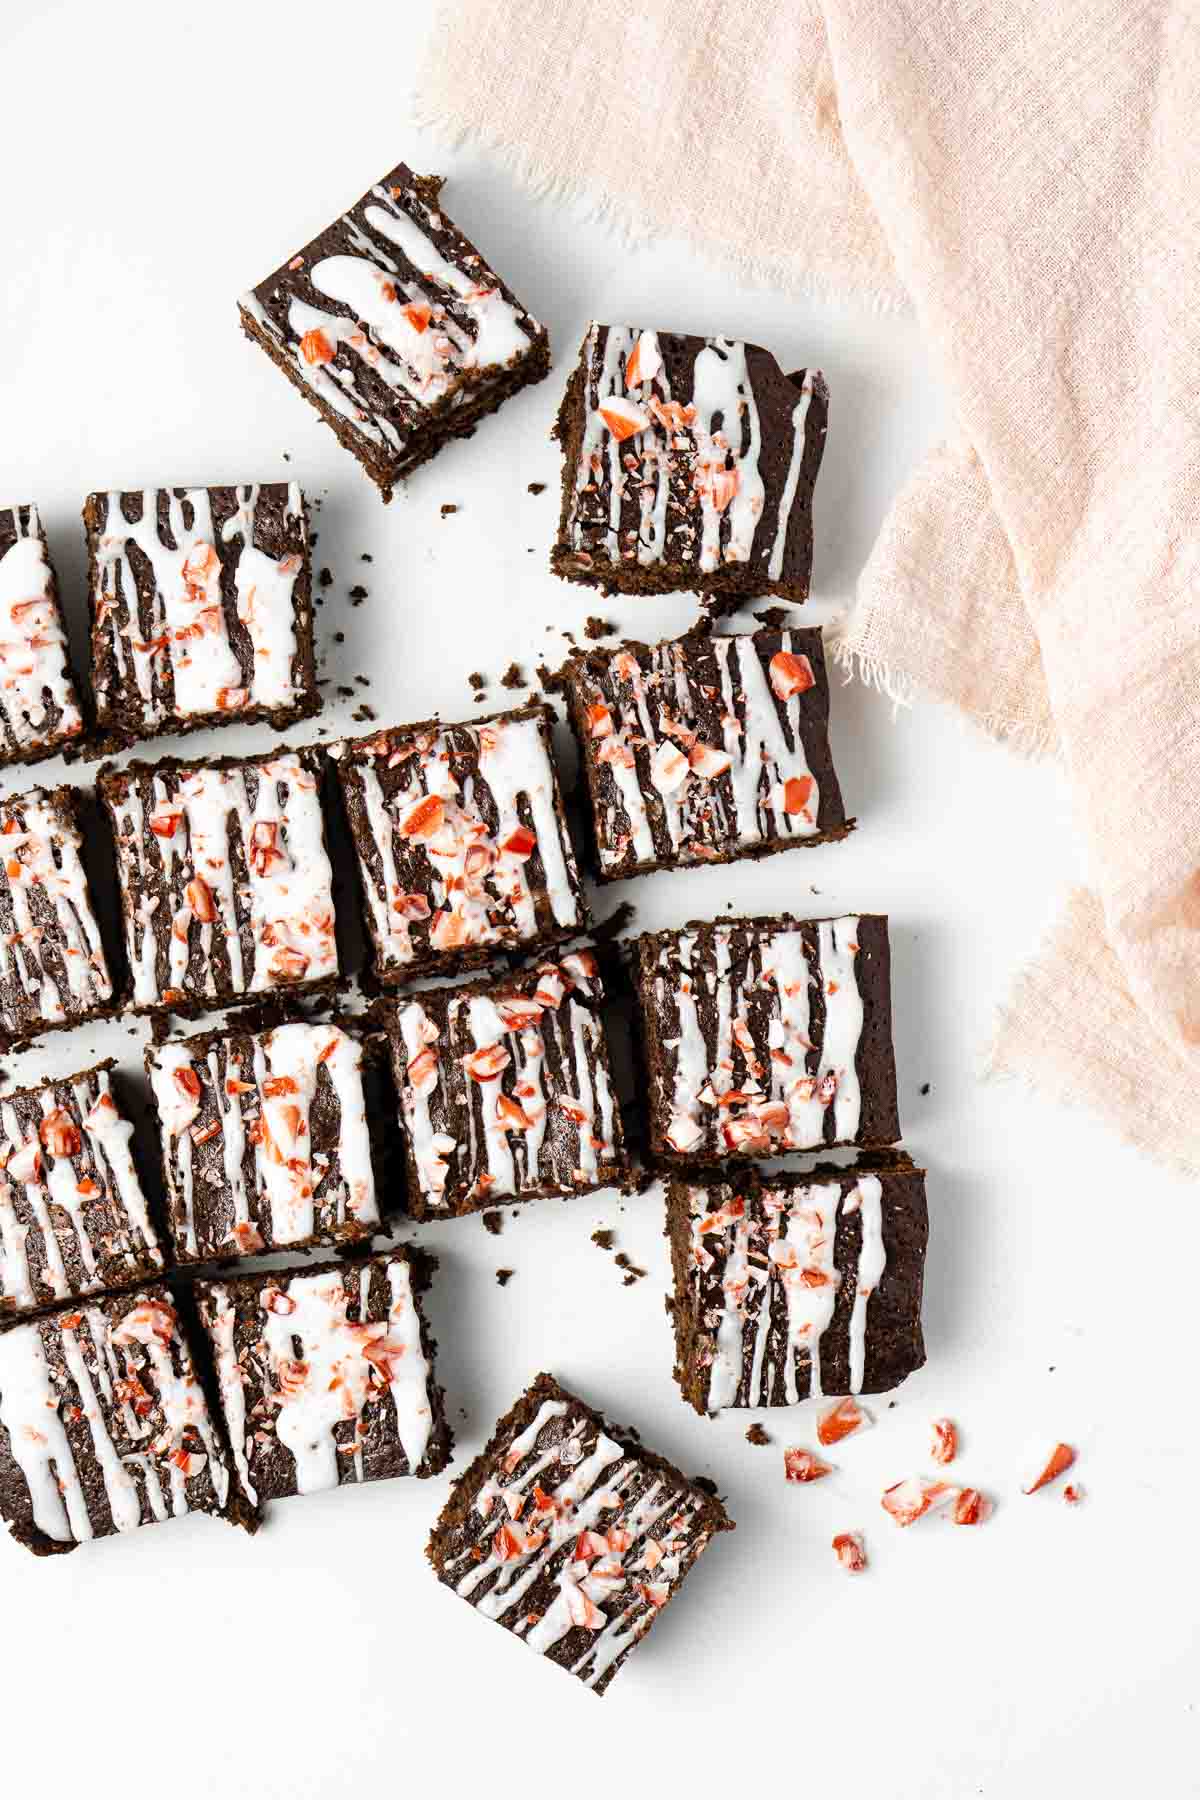 Chocolate peppermint brownies topped with white glaze and crushed candy canes